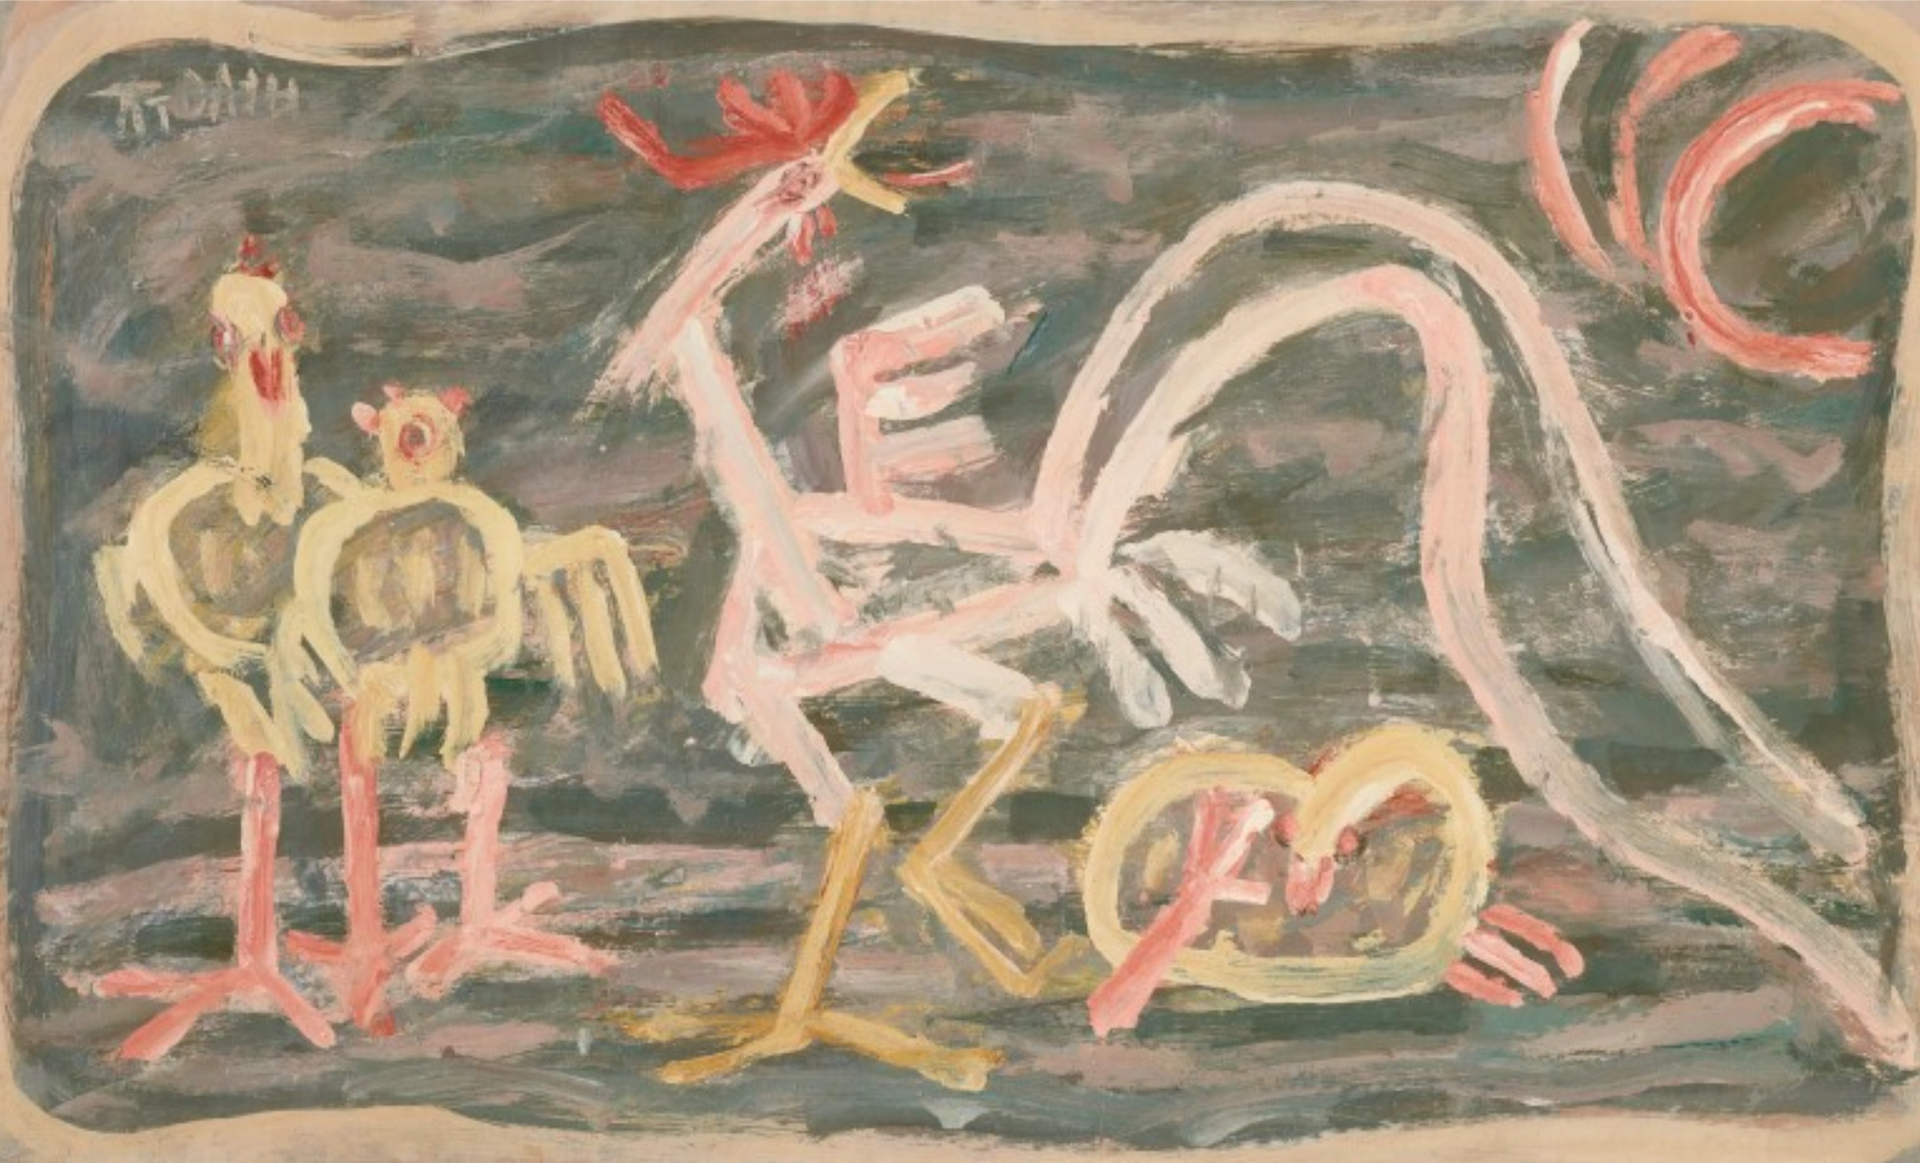 Chicken and Chicks (1950s) by the late artist Lee Jung Seob. Courtesy of MMCA Seoul